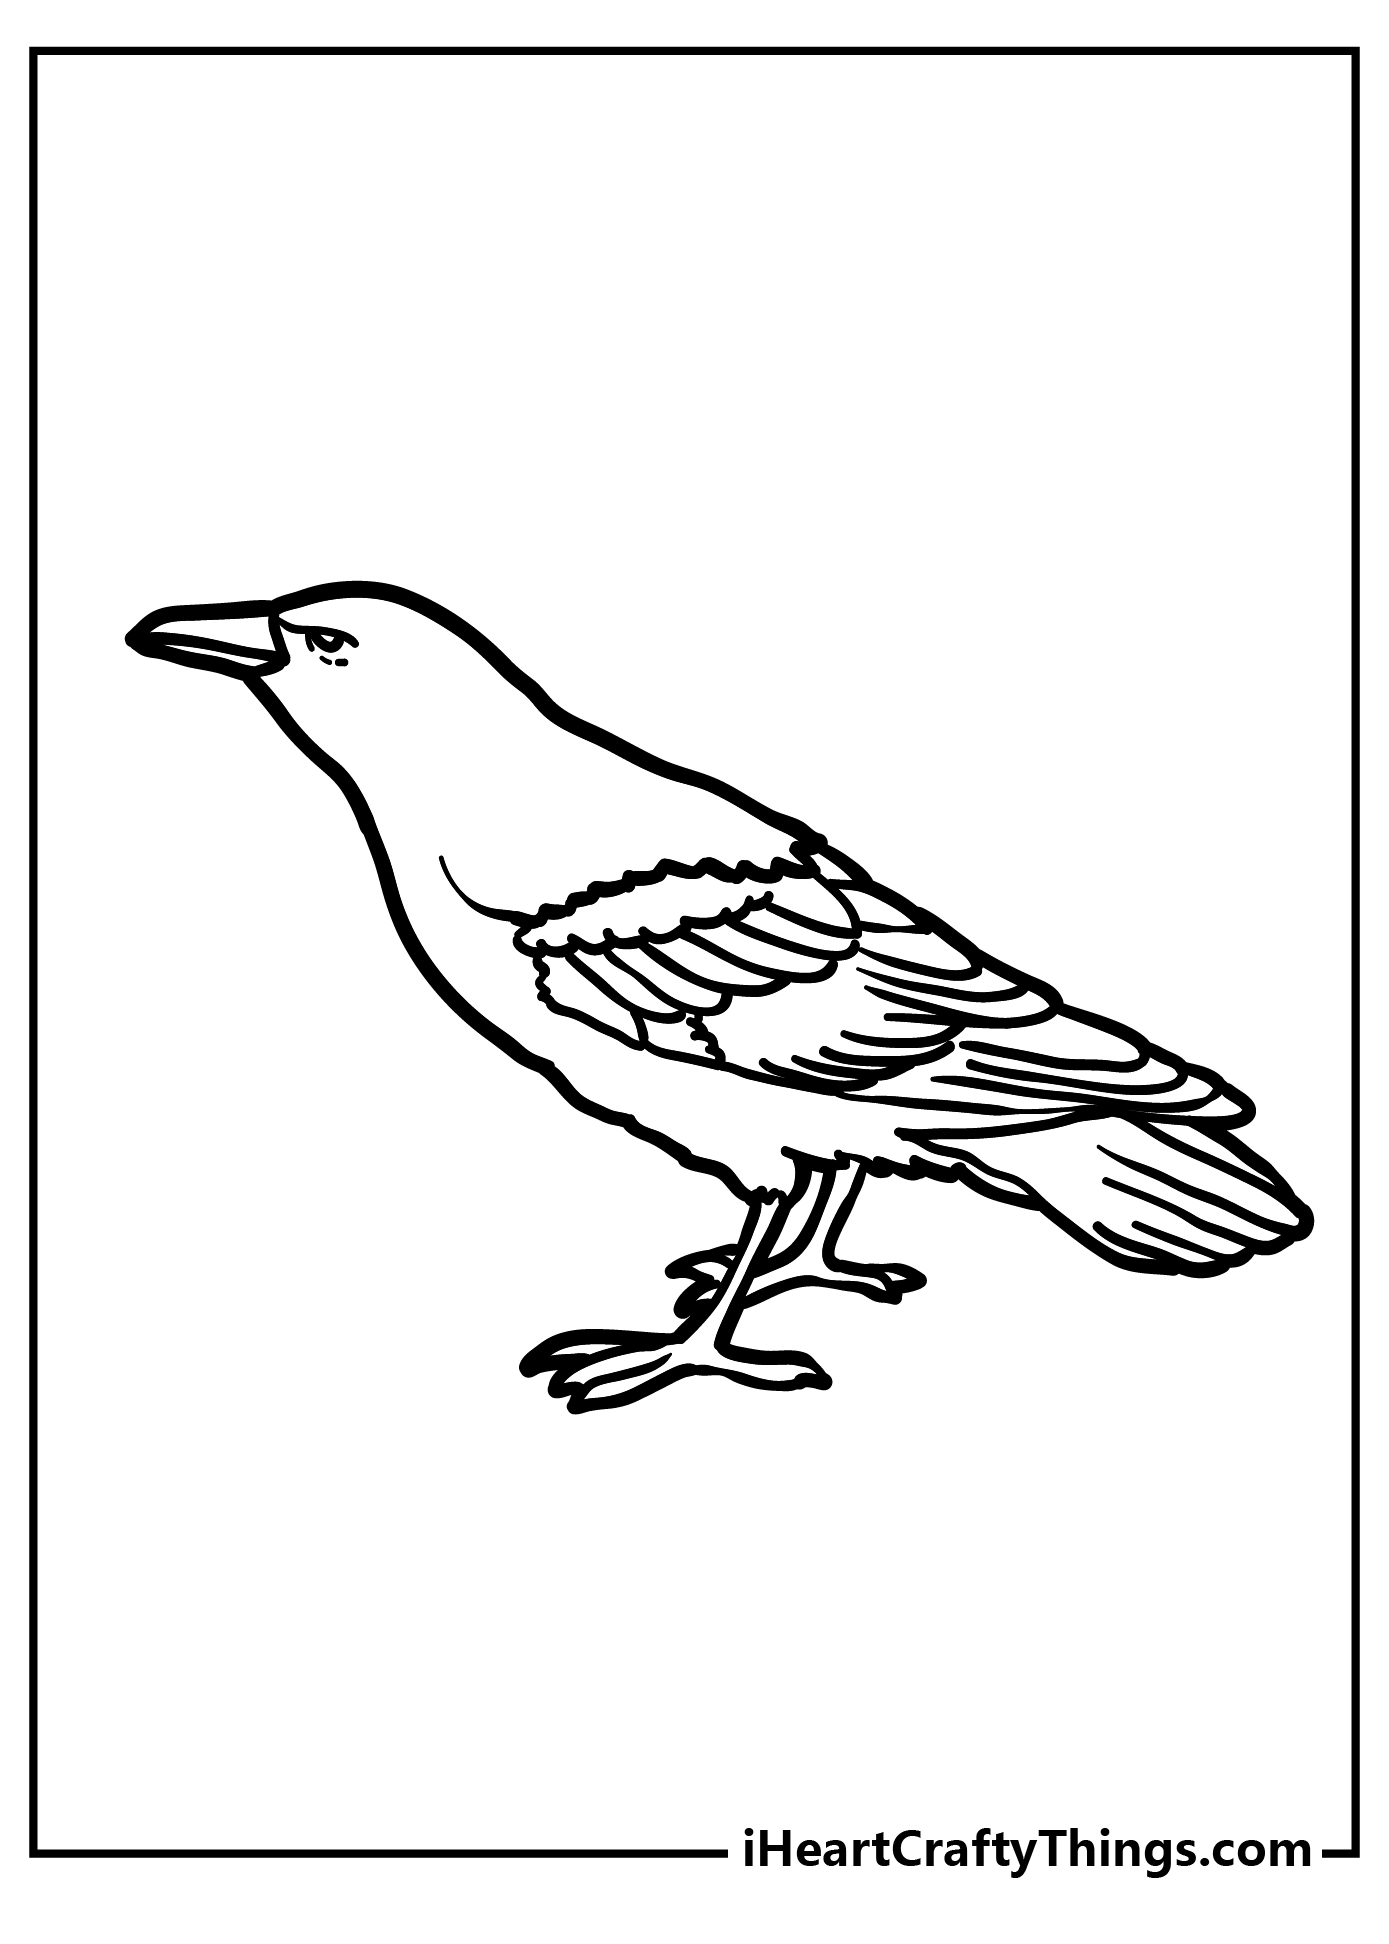 Raven Coloring Pages for kids free download